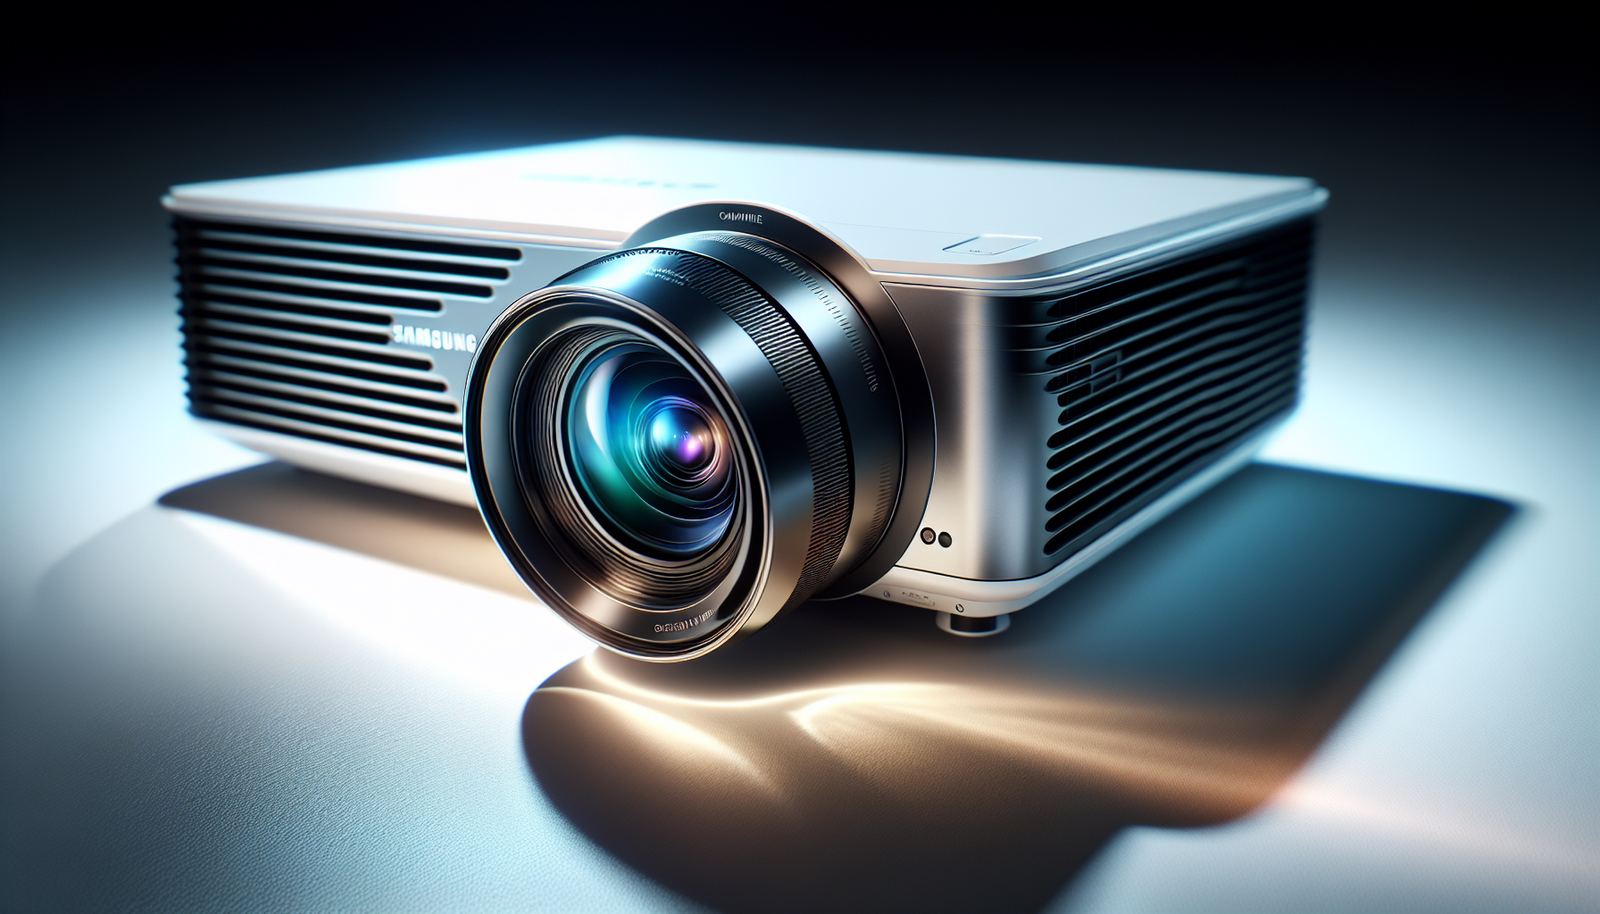 Samsung’s new Premiere projectors offer touchscreen capabilities on any surface